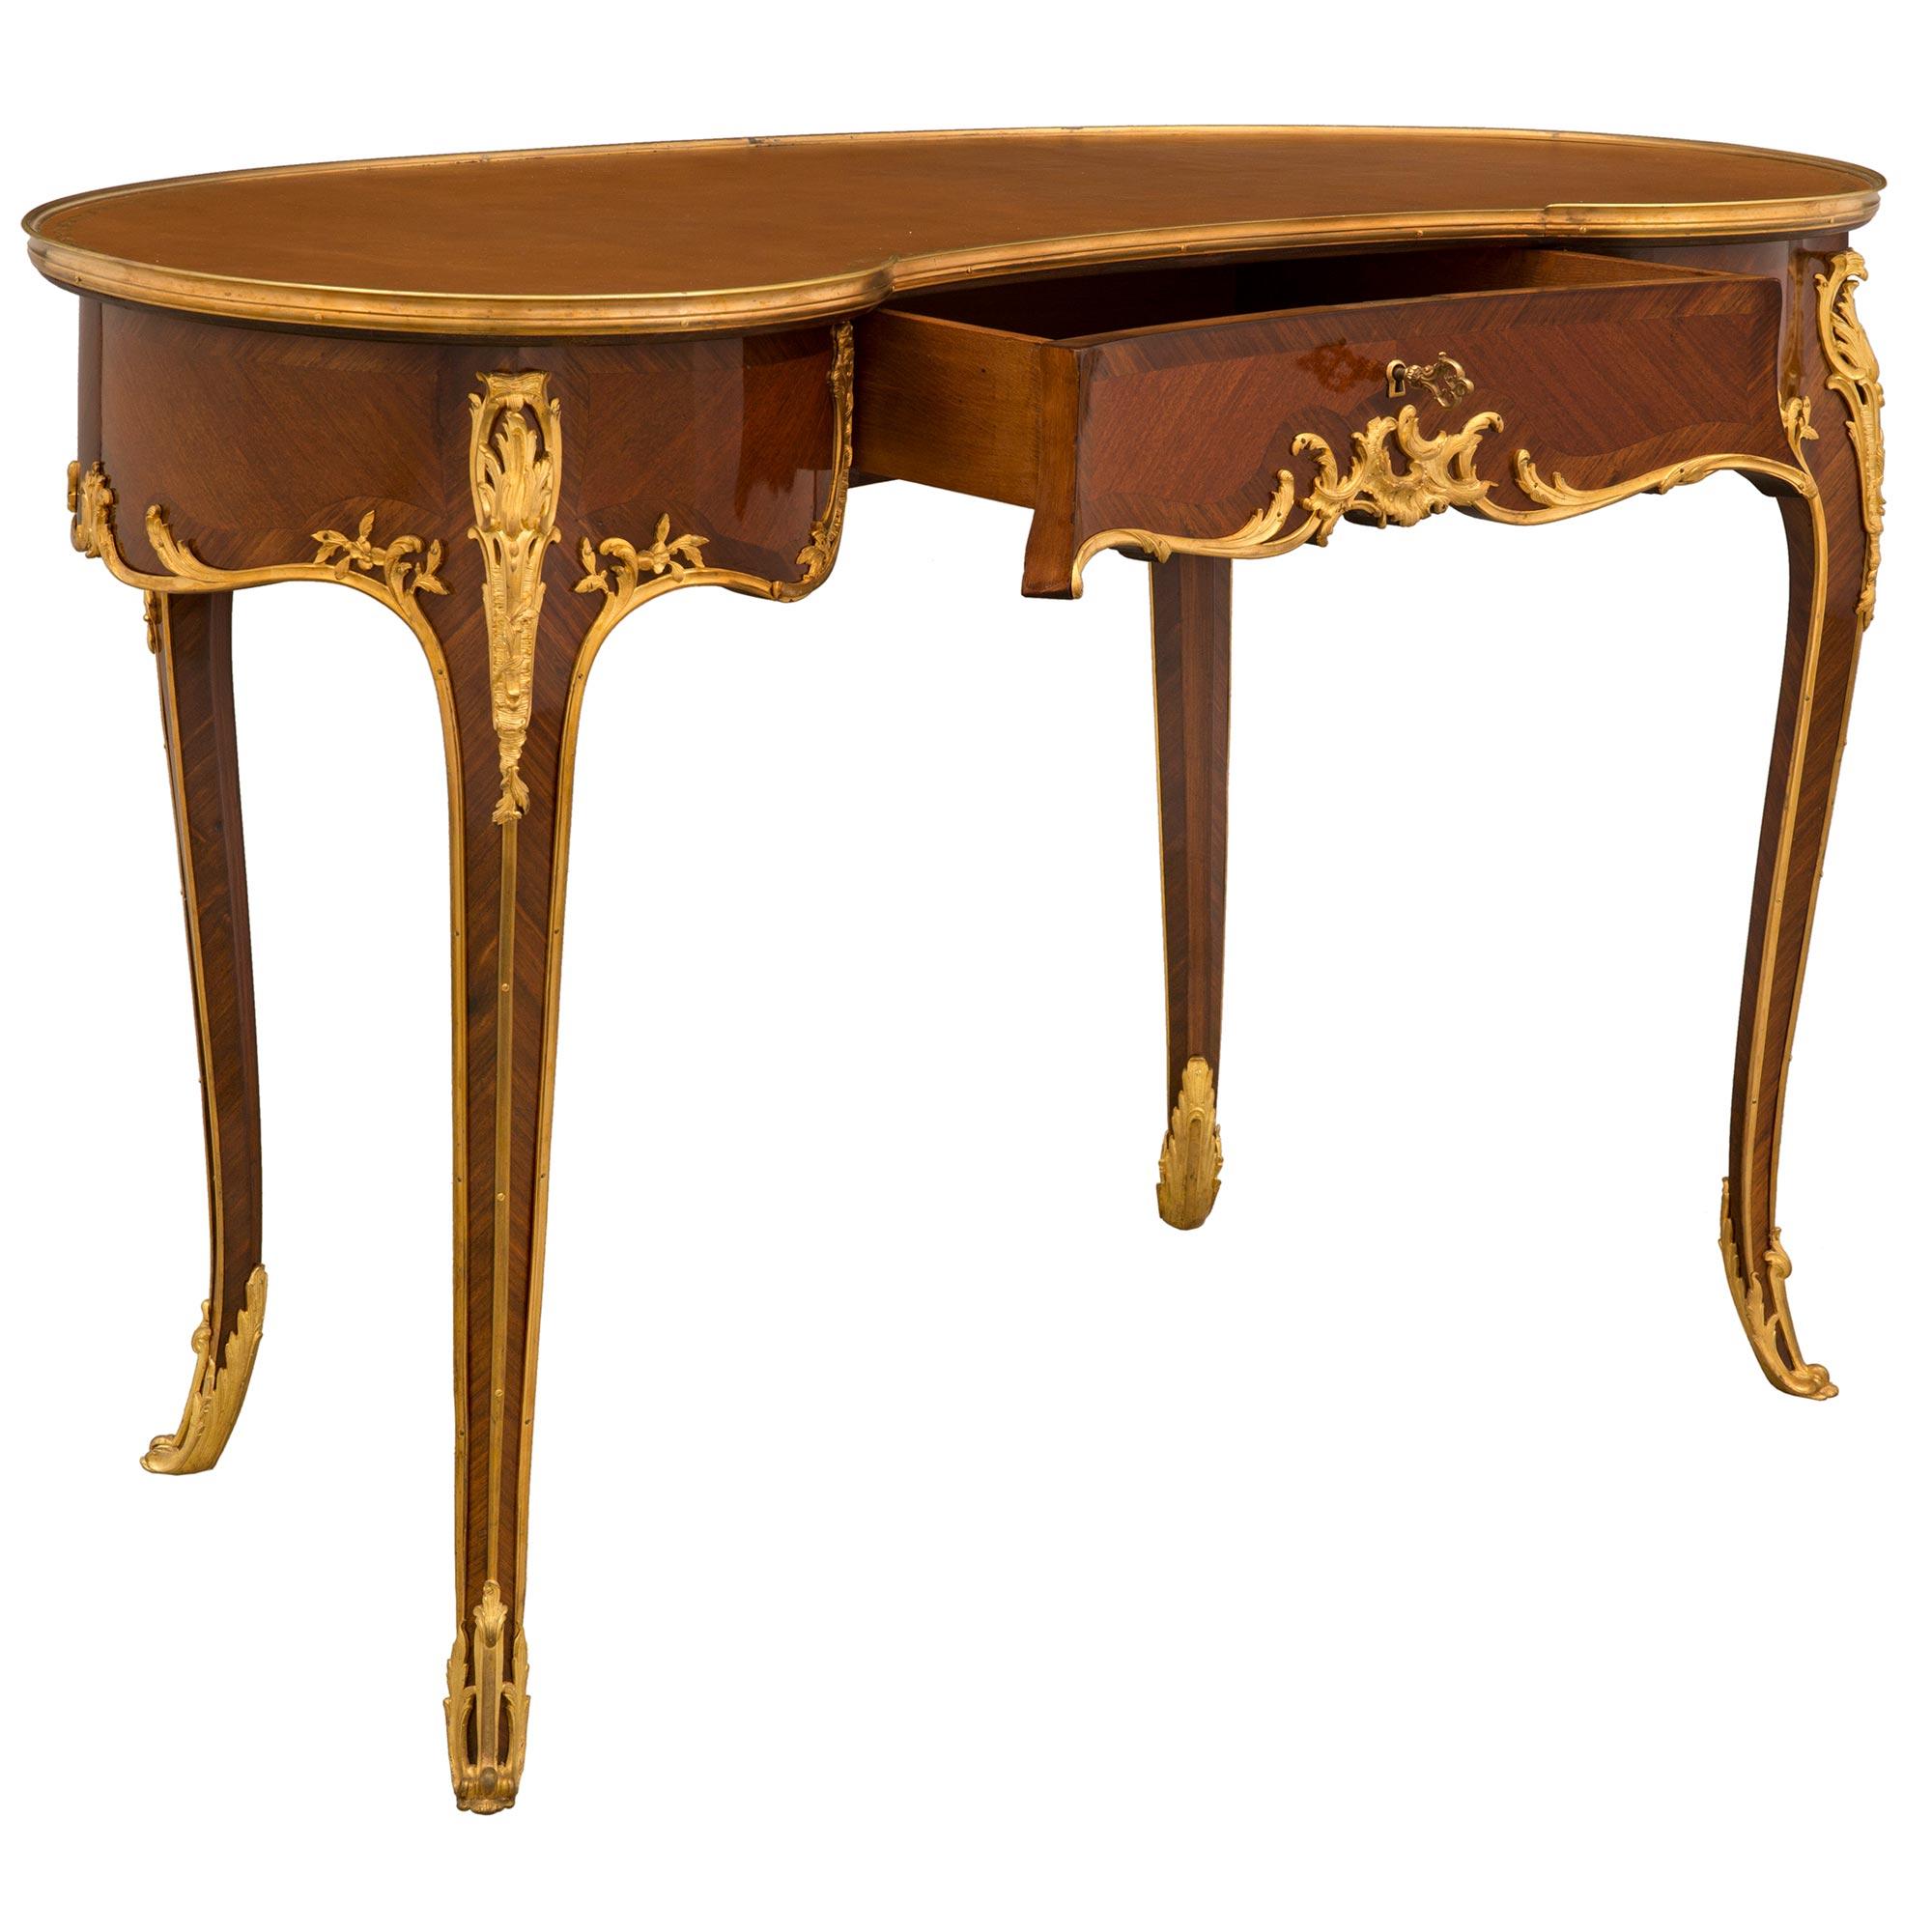 French 19th Century Louis XV Style Kingwood and Ormolu Desk, Attributed to Linke For Sale 1